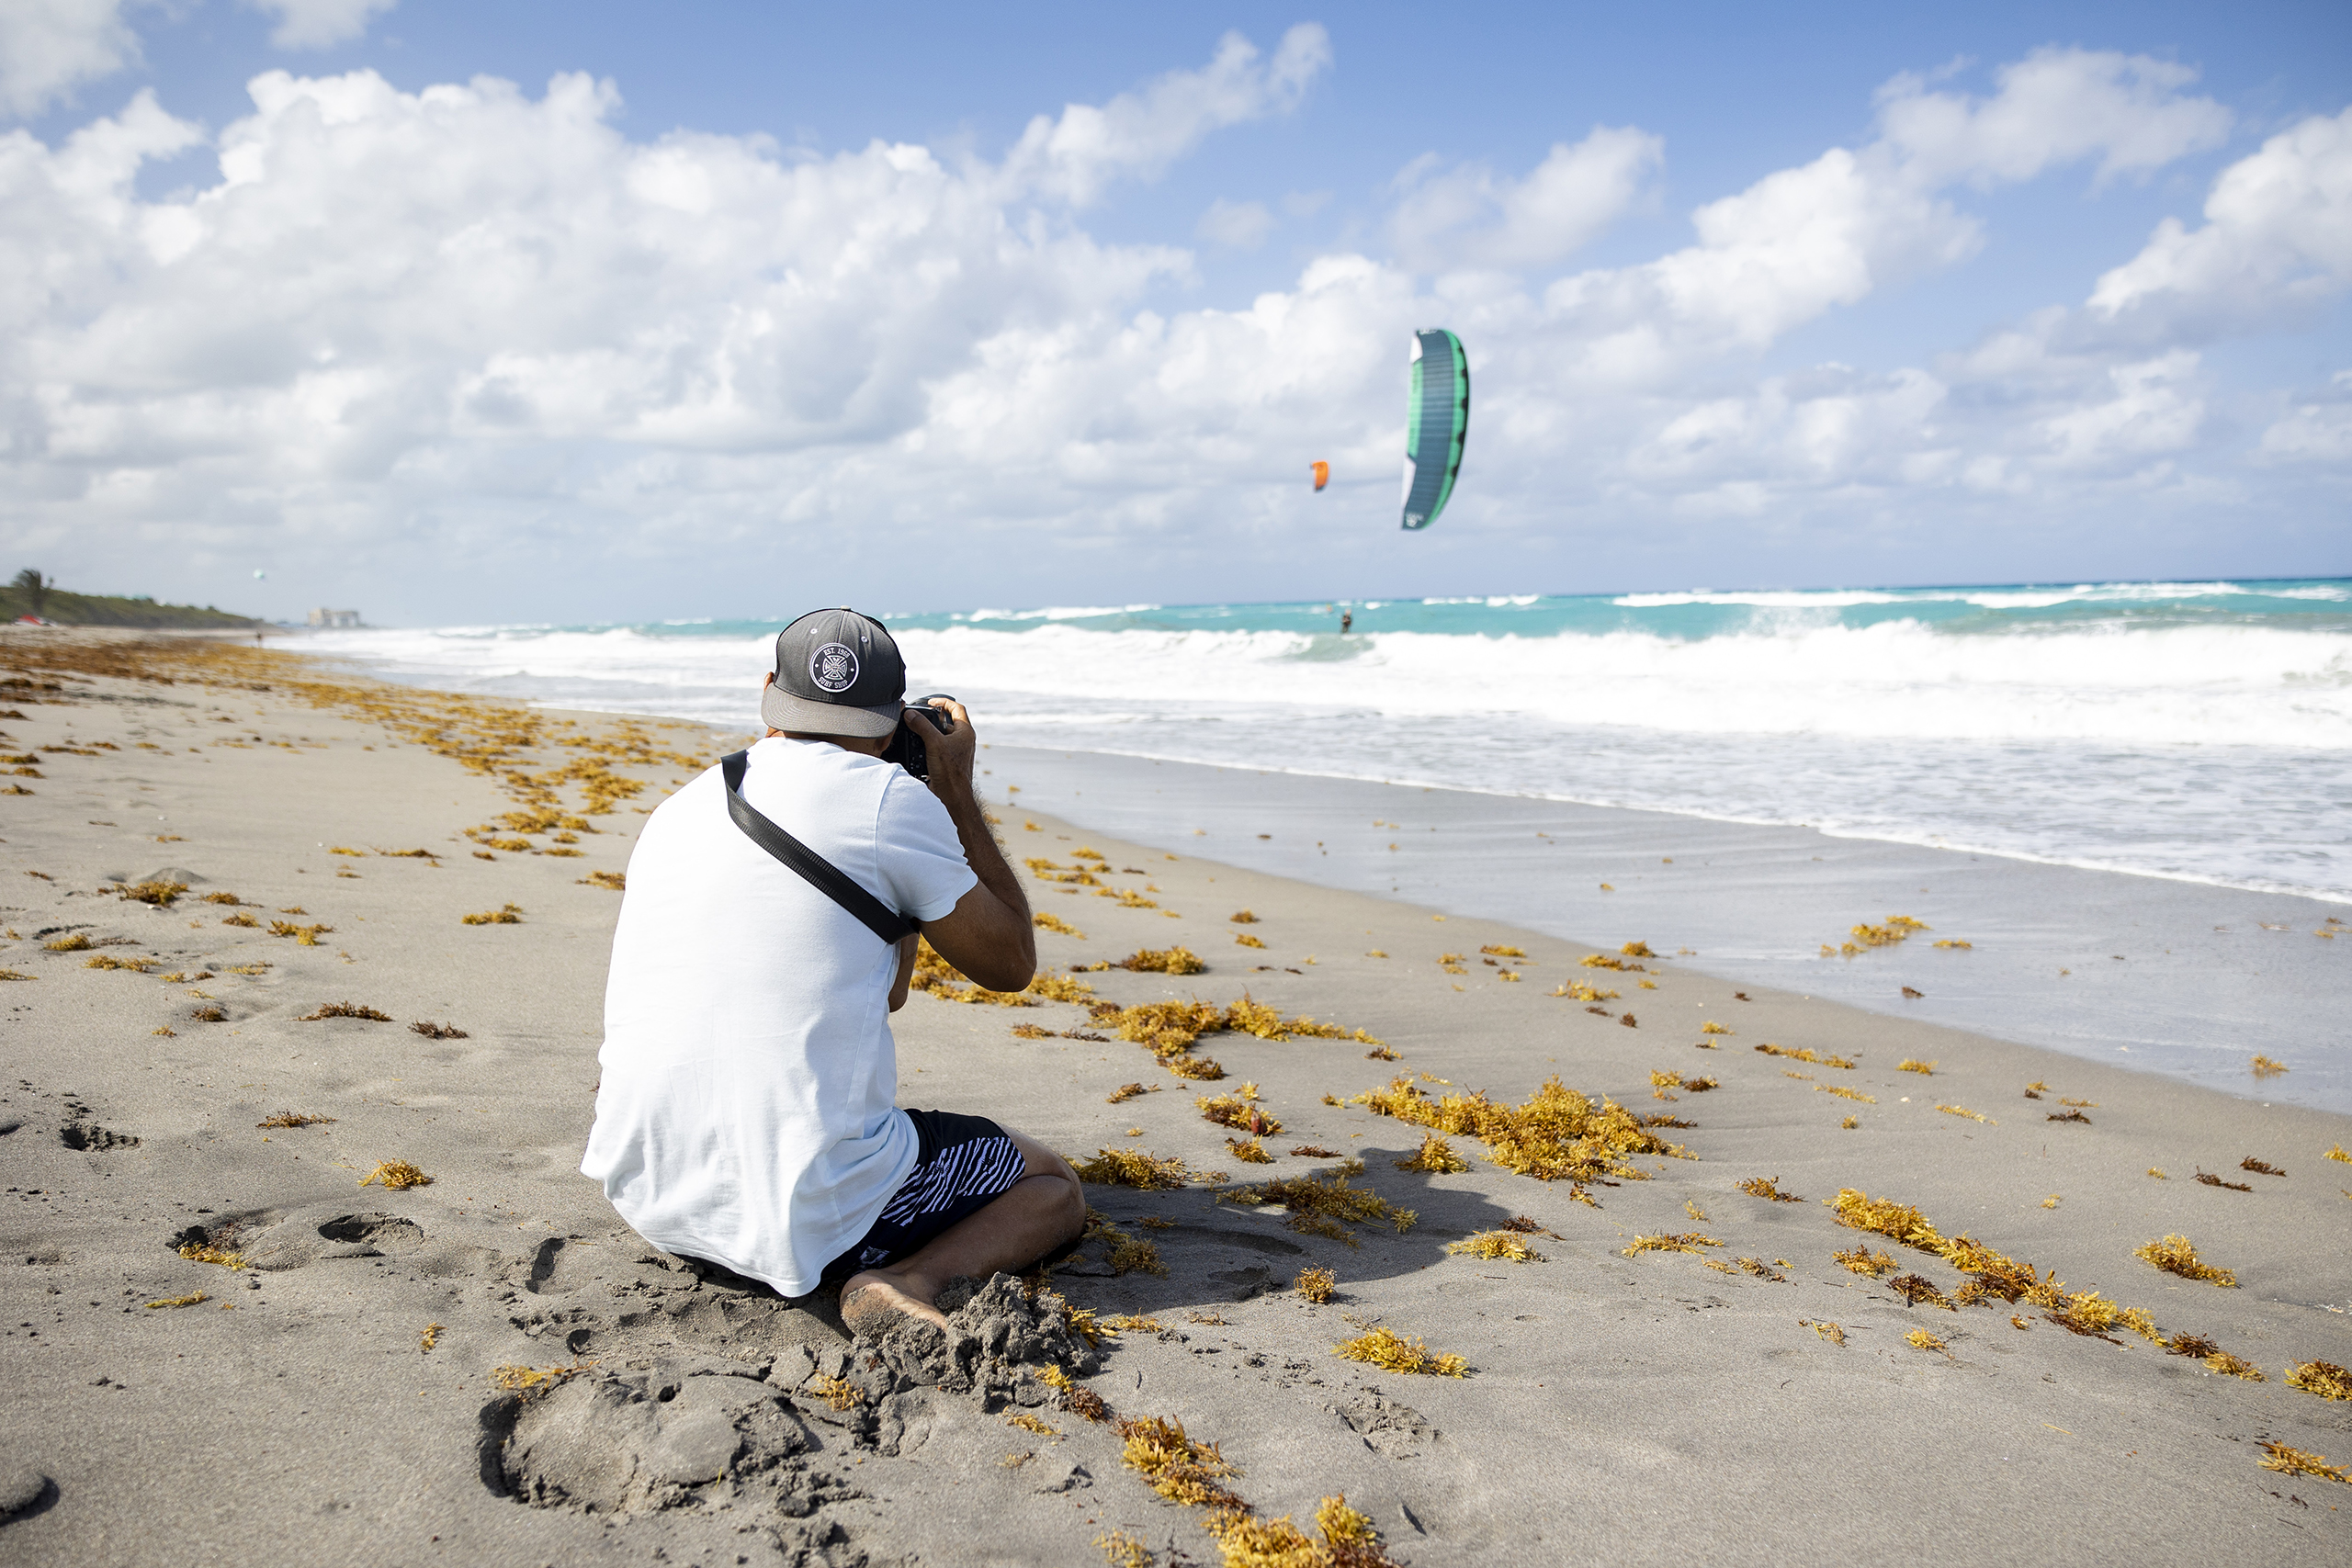 Photo of Tony Arruza kneeling on the beach, taking a photograph of a kiteboarder in the distance.